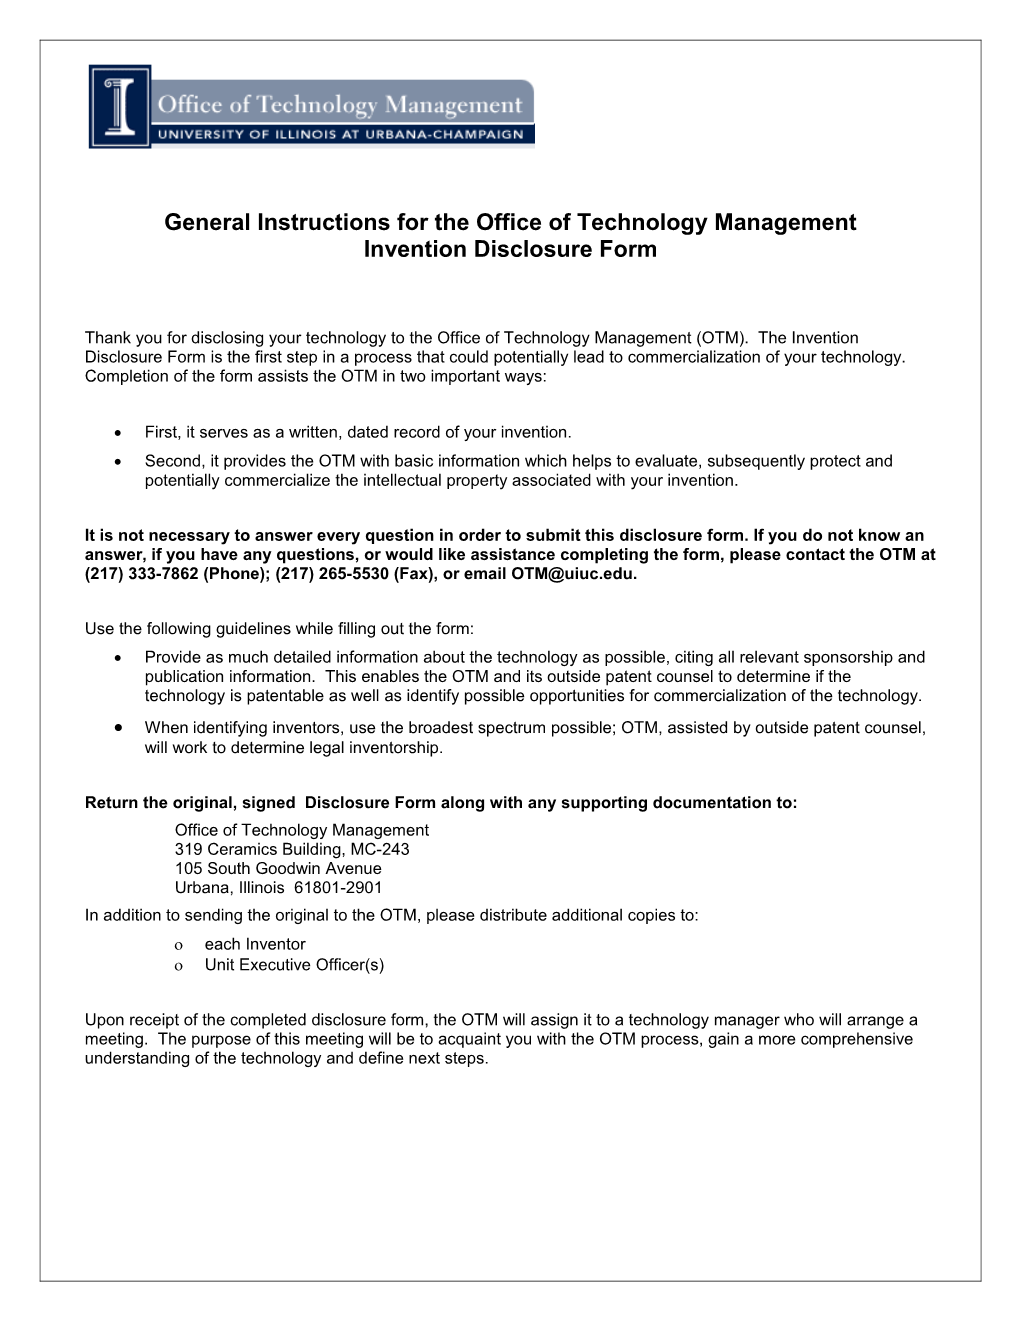 General Instructions for the Office of Technology Management